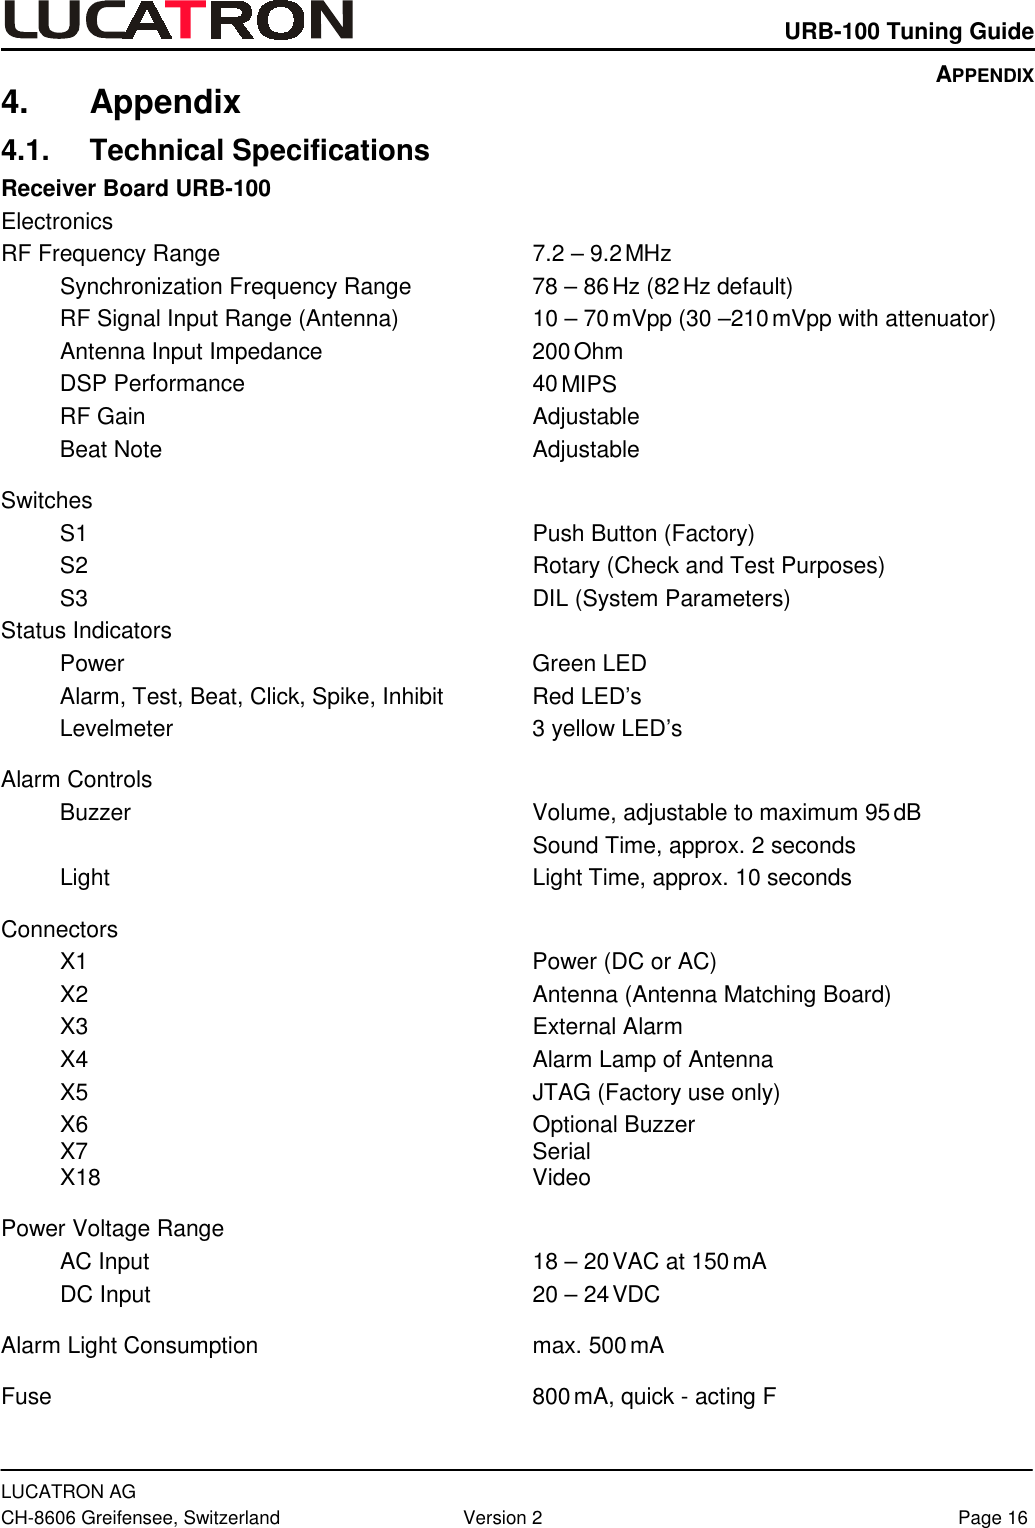    URB-100 Tuning Guide  LUCATRON AG CH-8606 Greifensee, Switzerland  Version 2  Page 16 4. Appendix 4.1. Technical Specifications Receiver Board URB-100 Electronics RF Frequency Range  7.2 – 9.2 MHz Synchronization Frequency Range  78 – 86 Hz (82 Hz default) RF Signal Input Range (Antenna)  10 – 70 mVpp (30 –210 mVpp with attenuator) Antenna Input Impedance  200 Ohm DSP Performance  40 MIPS RF Gain  Adjustable Beat Note  Adjustable Switches S1 Push Button (Factory) S2  Rotary (Check and Test Purposes) S3  DIL (System Parameters) Status Indicators Power Green LED Alarm, Test, Beat, Click, Spike, Inhibit  Red LED’s Levelmeter  3 yellow LED’s Alarm Controls Buzzer  Volume, adjustable to maximum 95 dB   Sound Time, approx. 2 seconds Light  Light Time, approx. 10 seconds Connectors  X1  Power (DC or AC) X2  Antenna (Antenna Matching Board) X3 External Alarm X4  Alarm Lamp of Antenna X5  JTAG (Factory use only) X6 Optional Buzzer X7 Serial X18 Video Power Voltage Range AC Input  18 – 20 VAC at 150 mA DC Input  20 – 24 VDC Alarm Light Consumption  max. 500 mA Fuse 800 mA, quick - acting F APPENDIX 